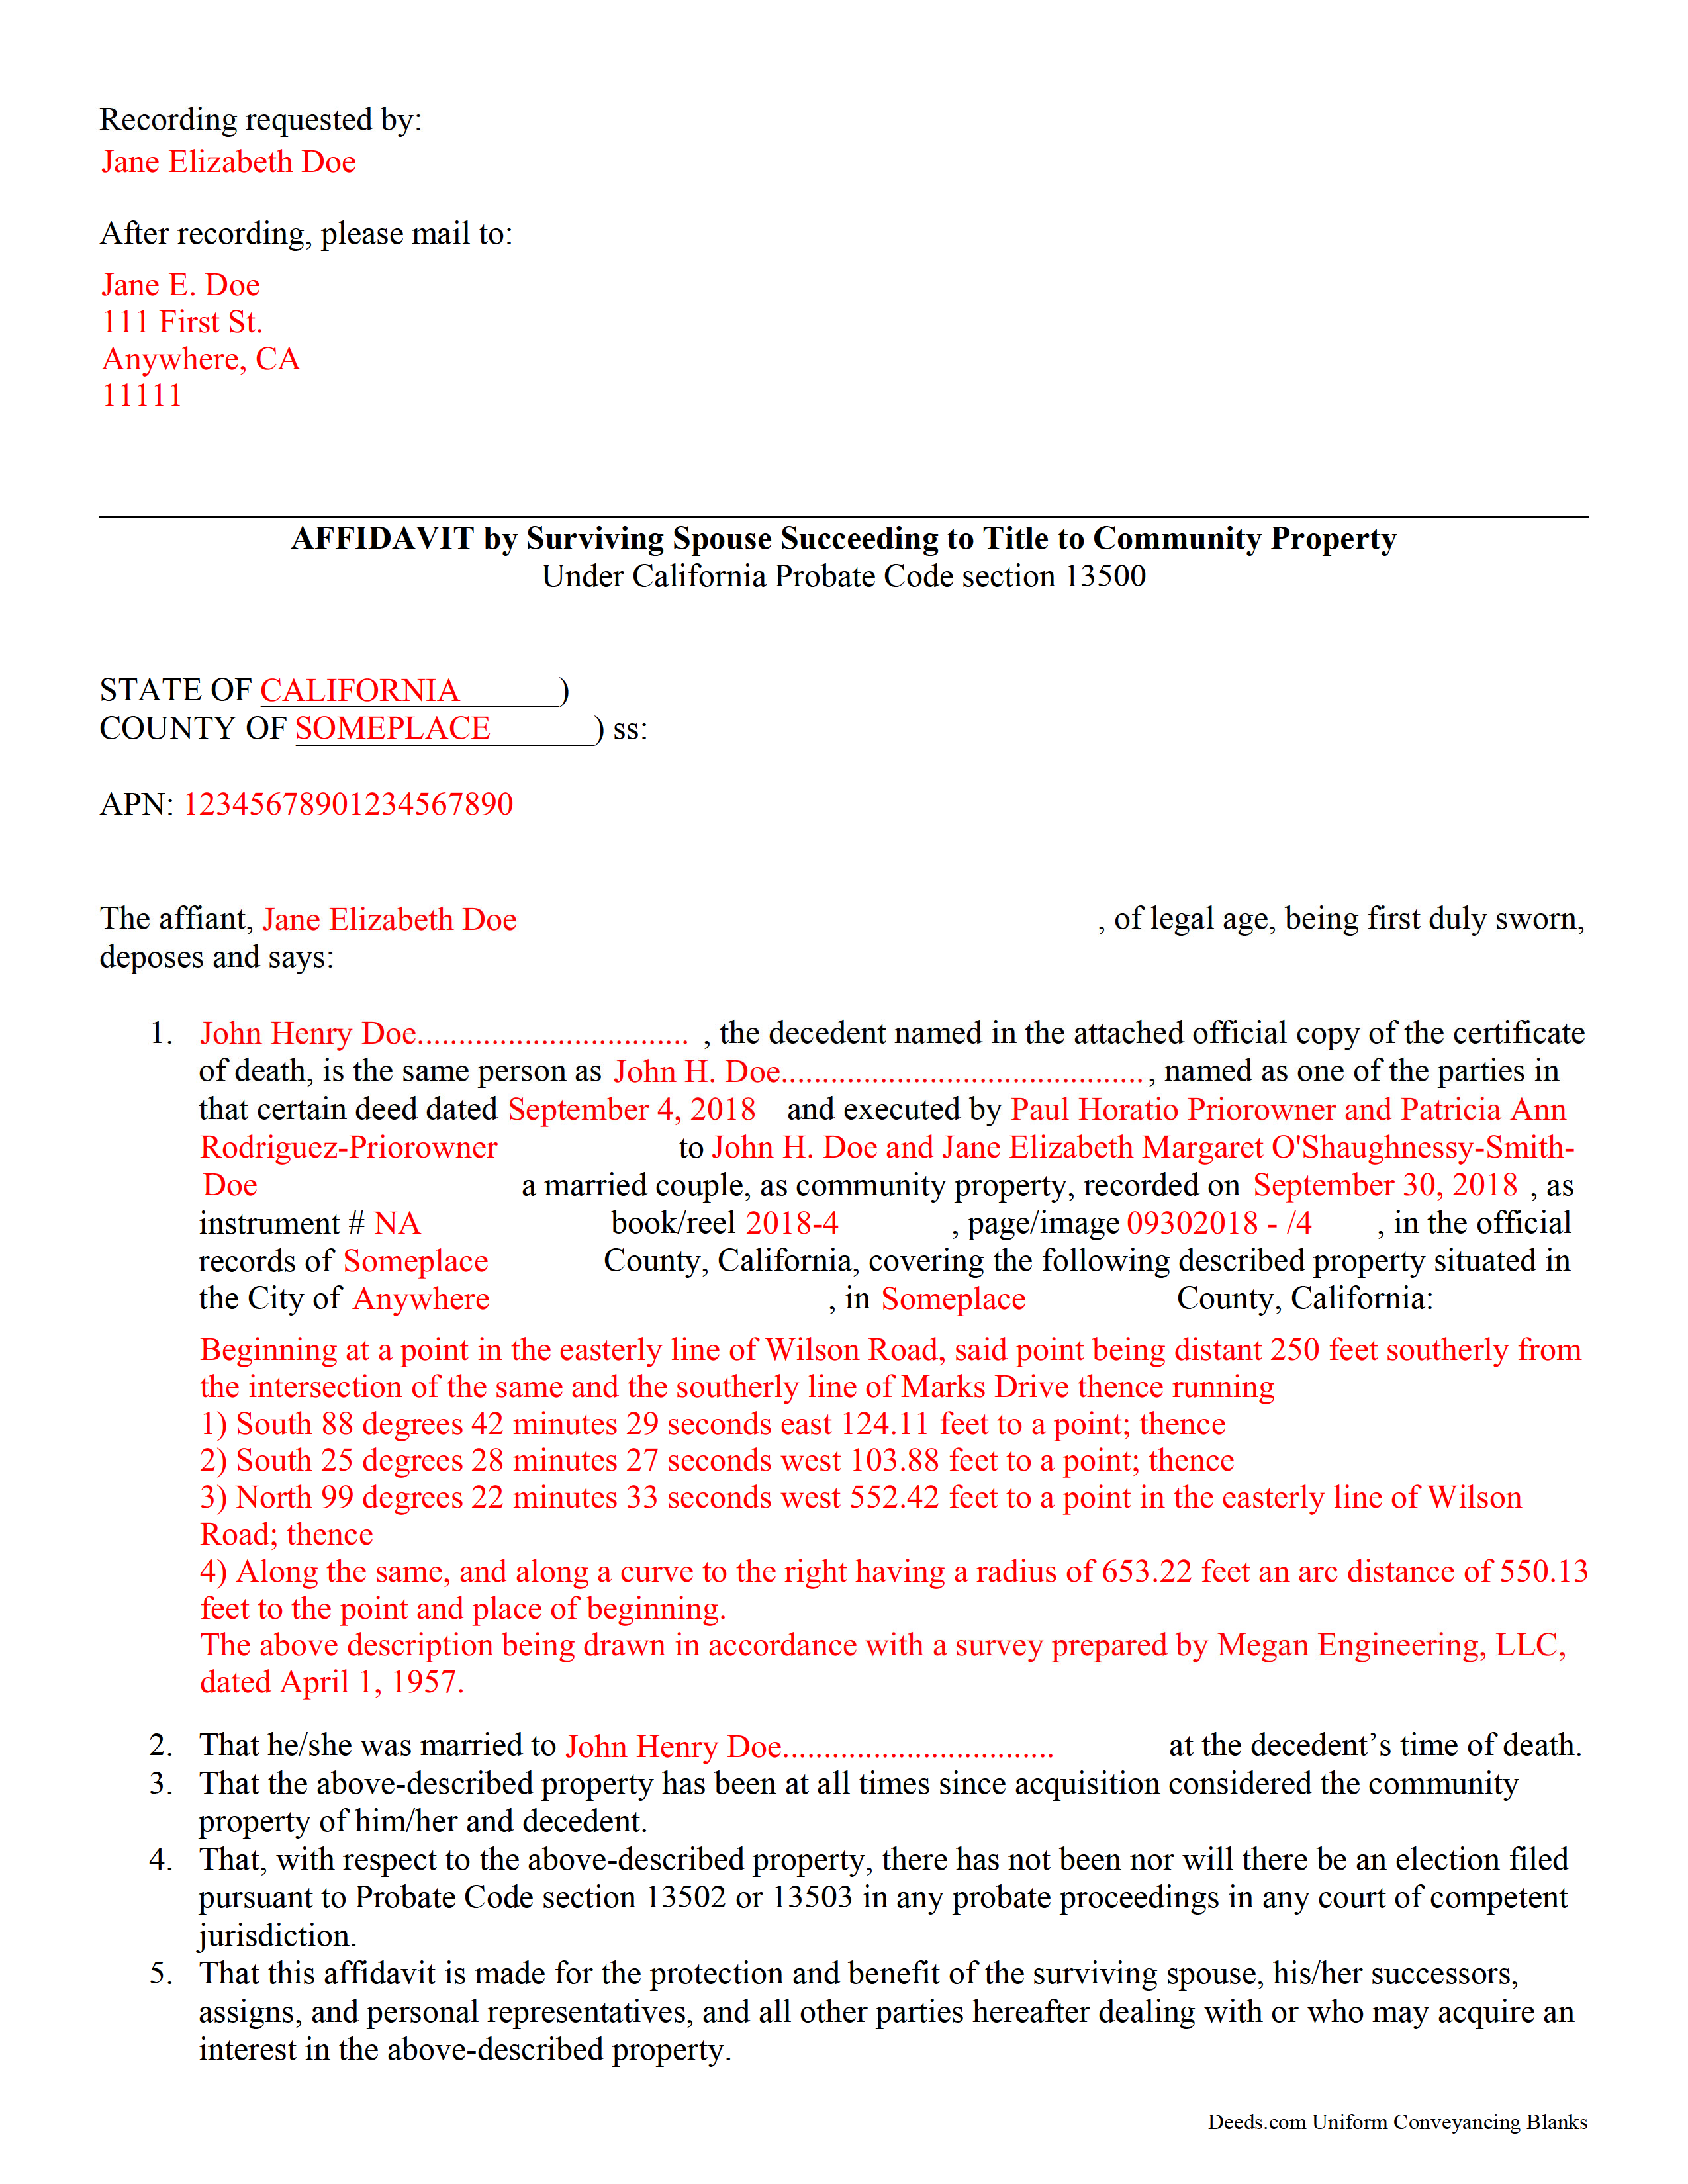 Completed Example of the Affidavit of Surviving Spouse Document